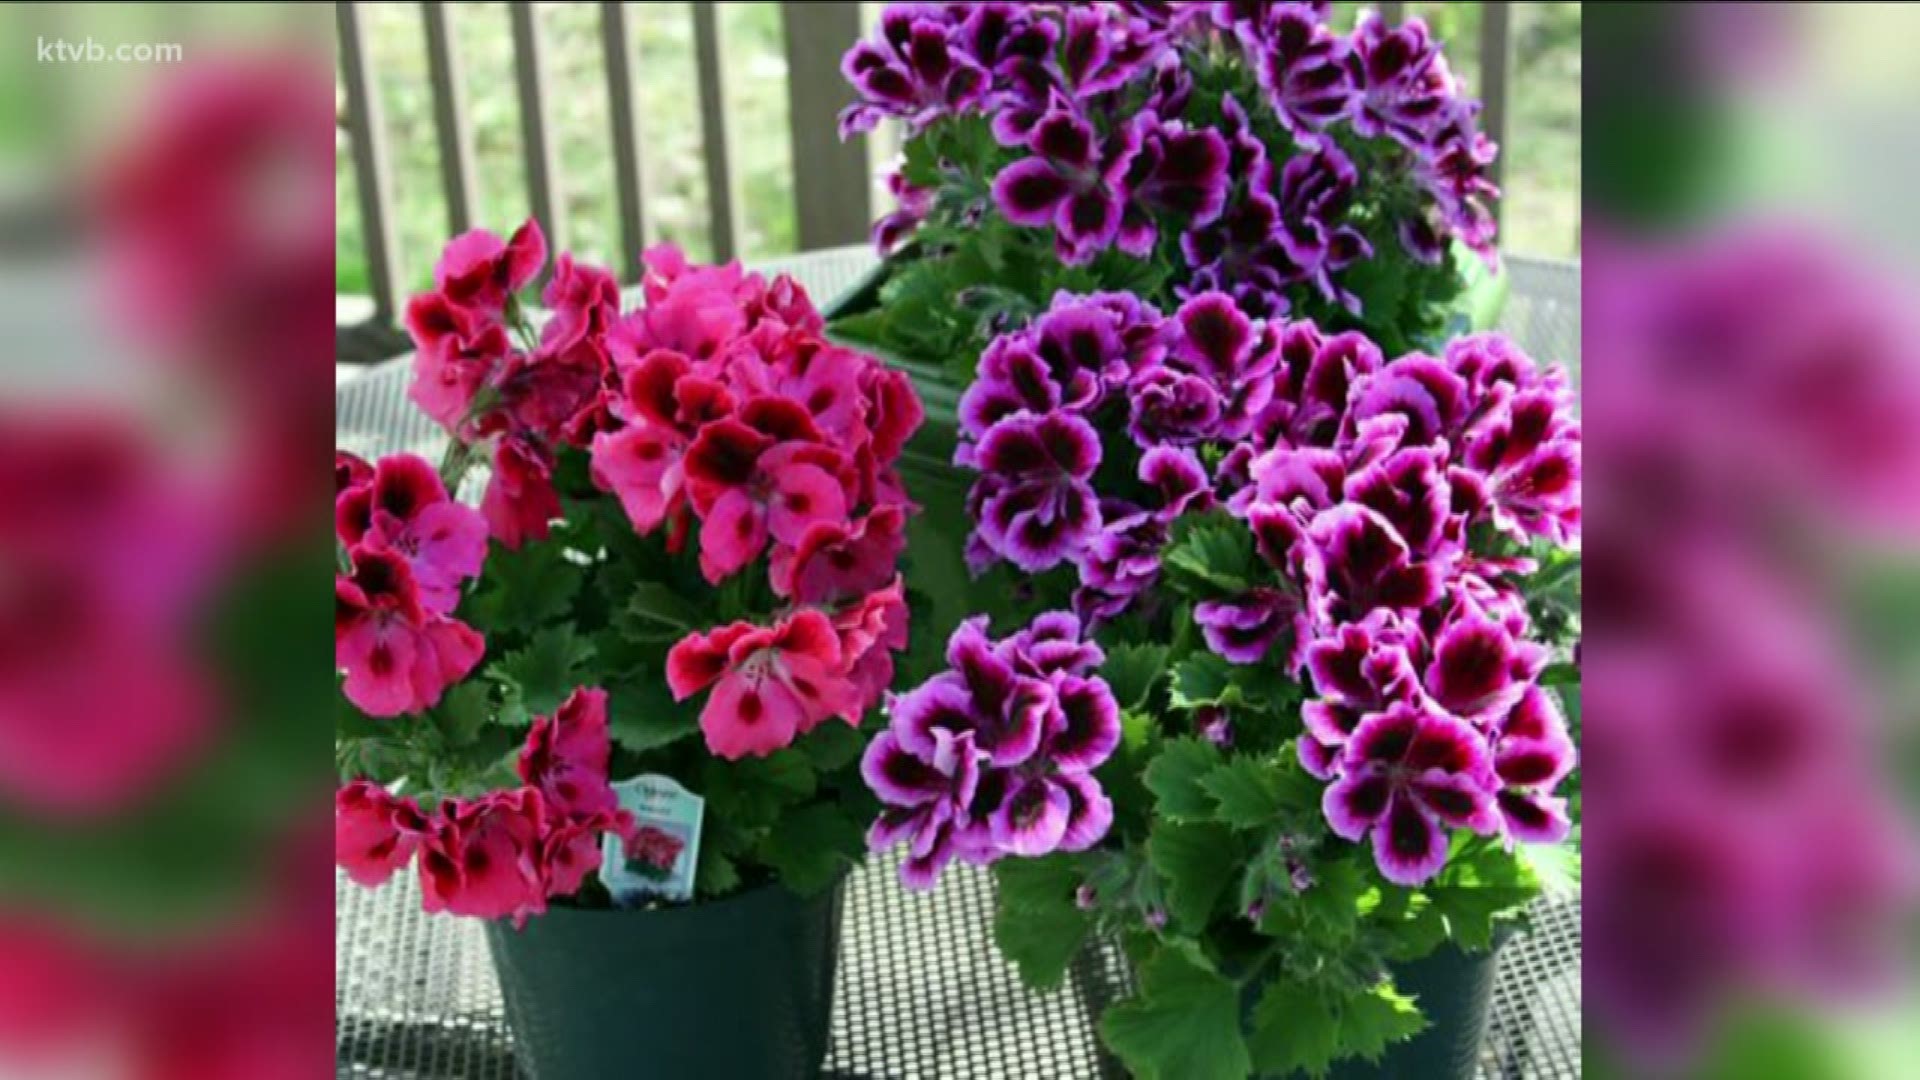 JIm Duthie tells that geraniums thrive in pots and containers making them a popular plant for any yard.